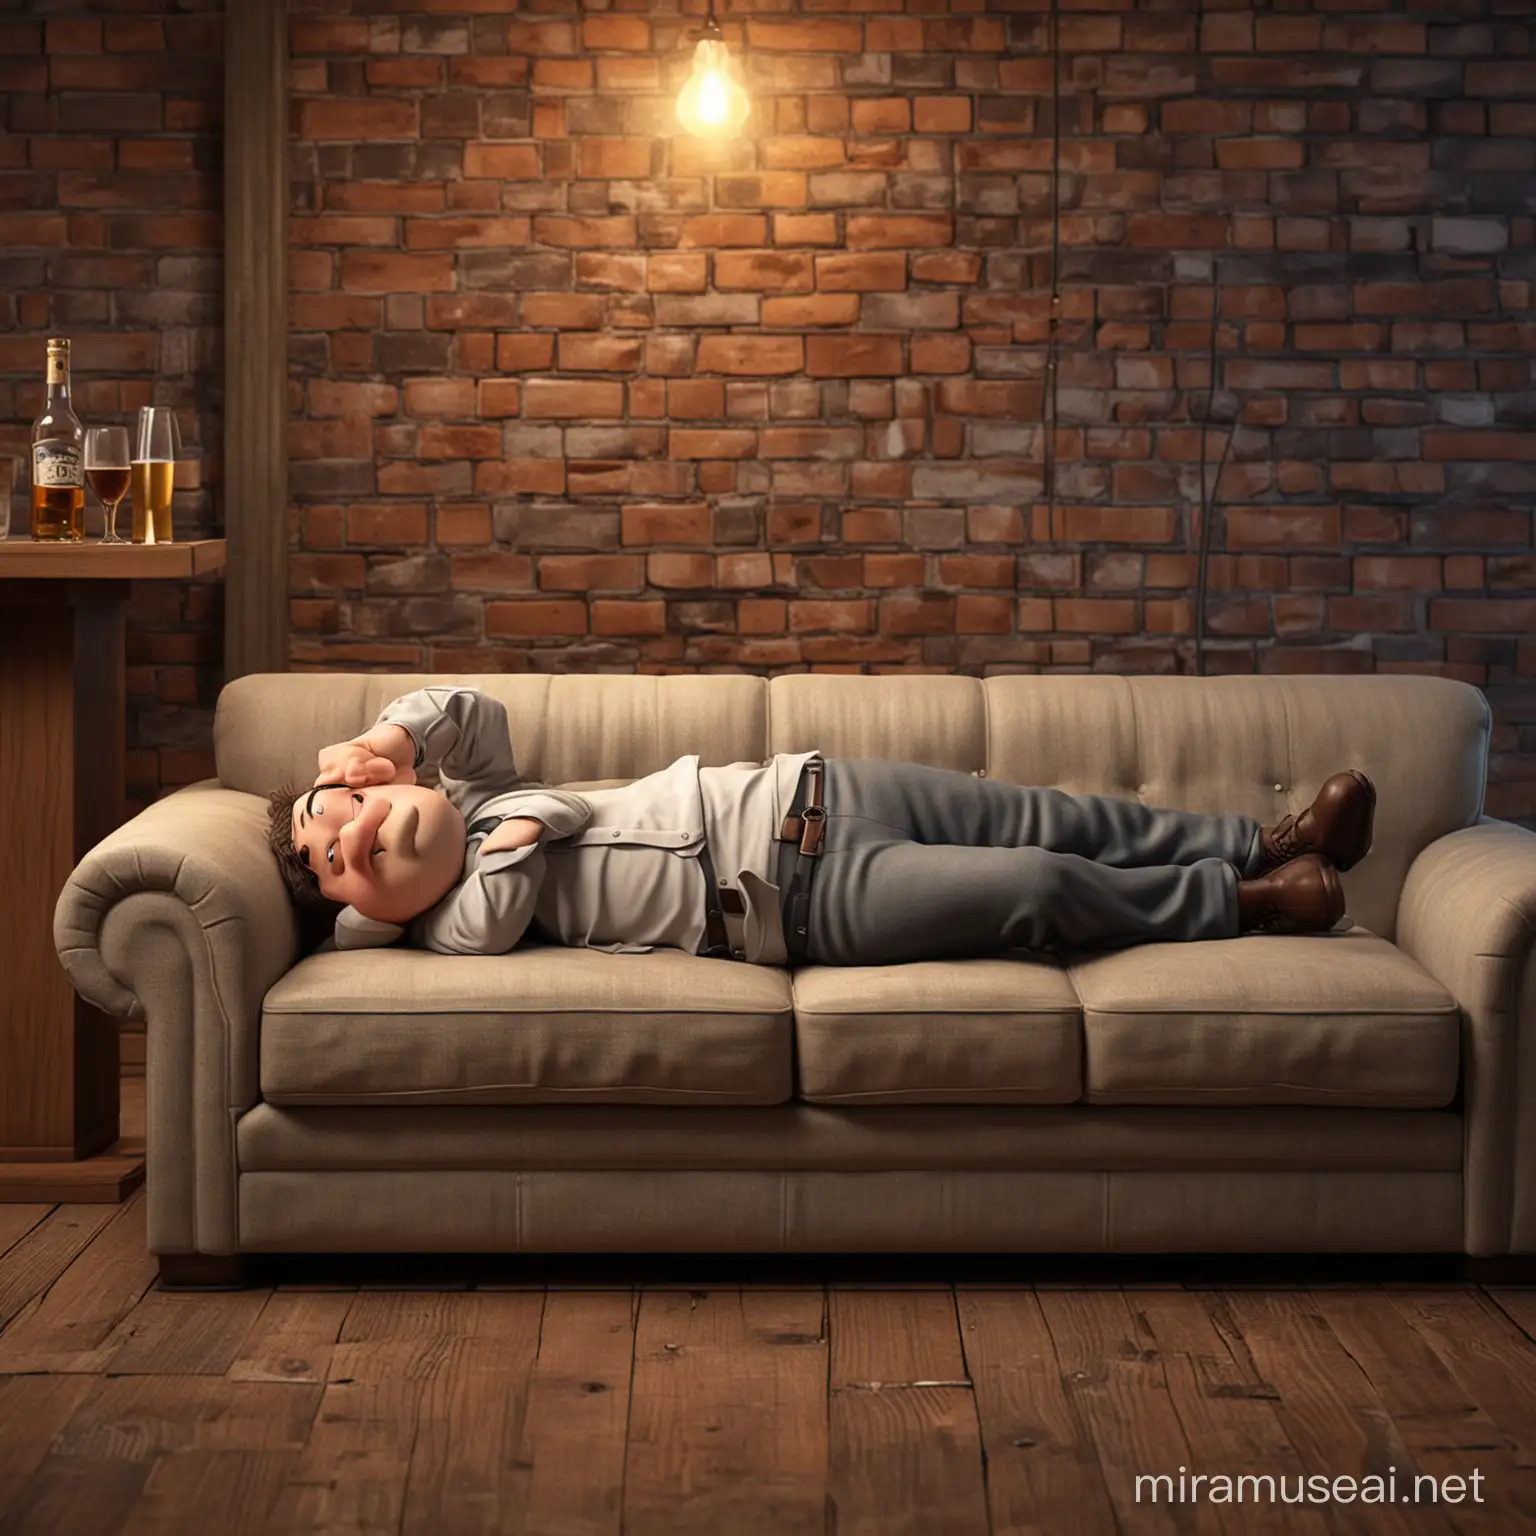 Drunk Man Sleeping Sadly on Sofa in 3D Character Old Bar Background